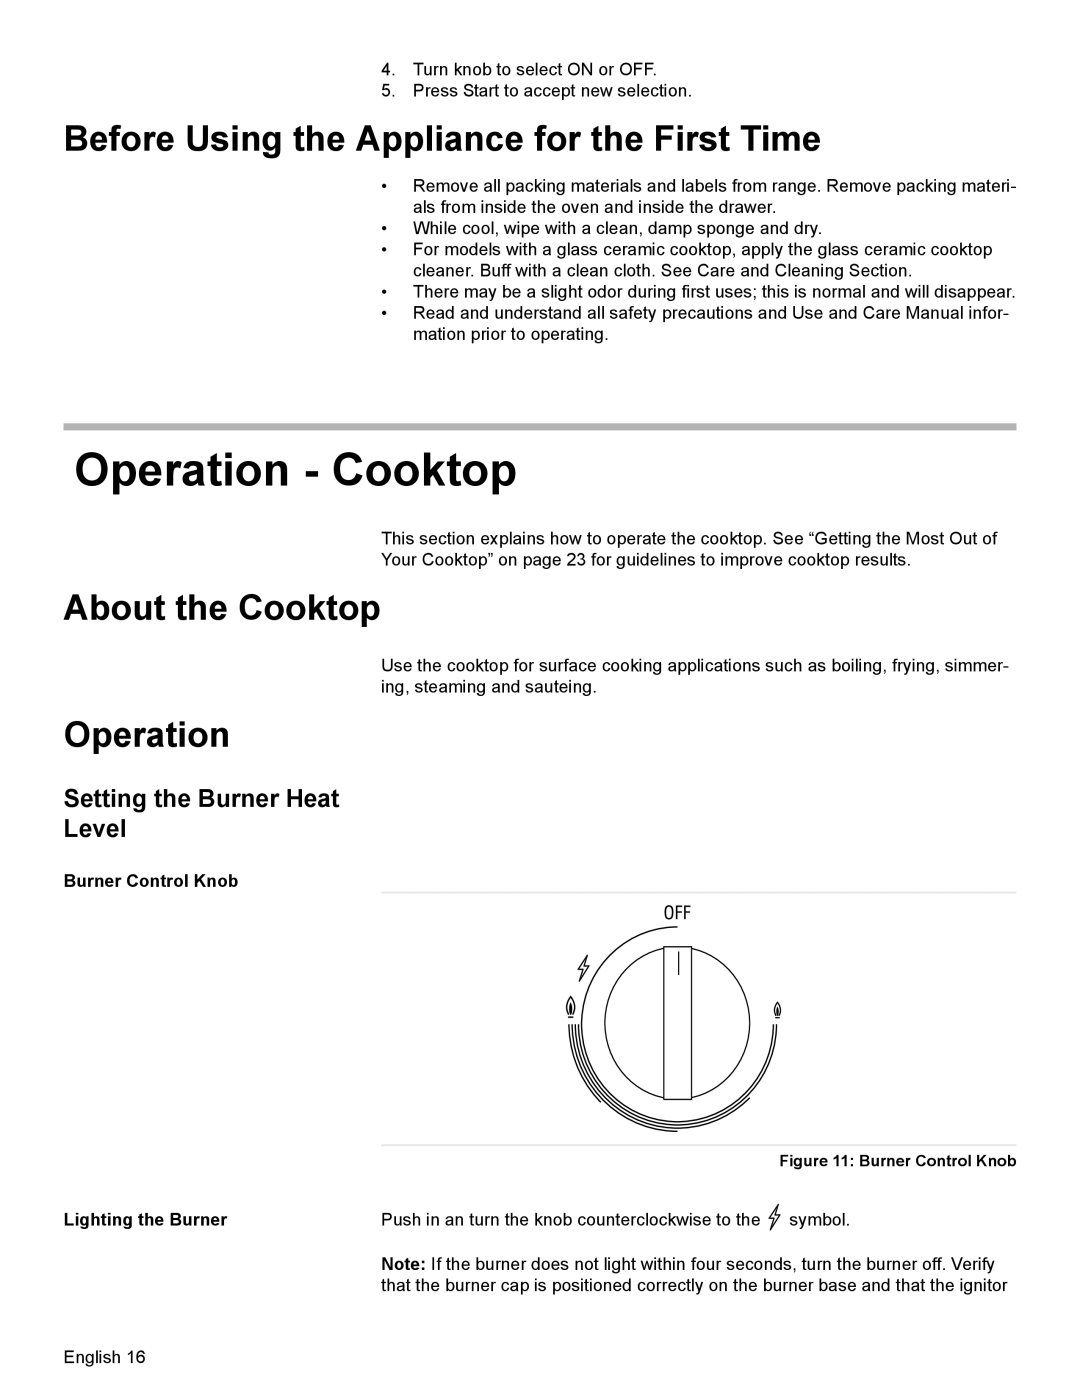 Bosch Appliances HGS7052UC manual Operation - Cooktop, Before Using the Appliance for the First Time, About the Cooktop 